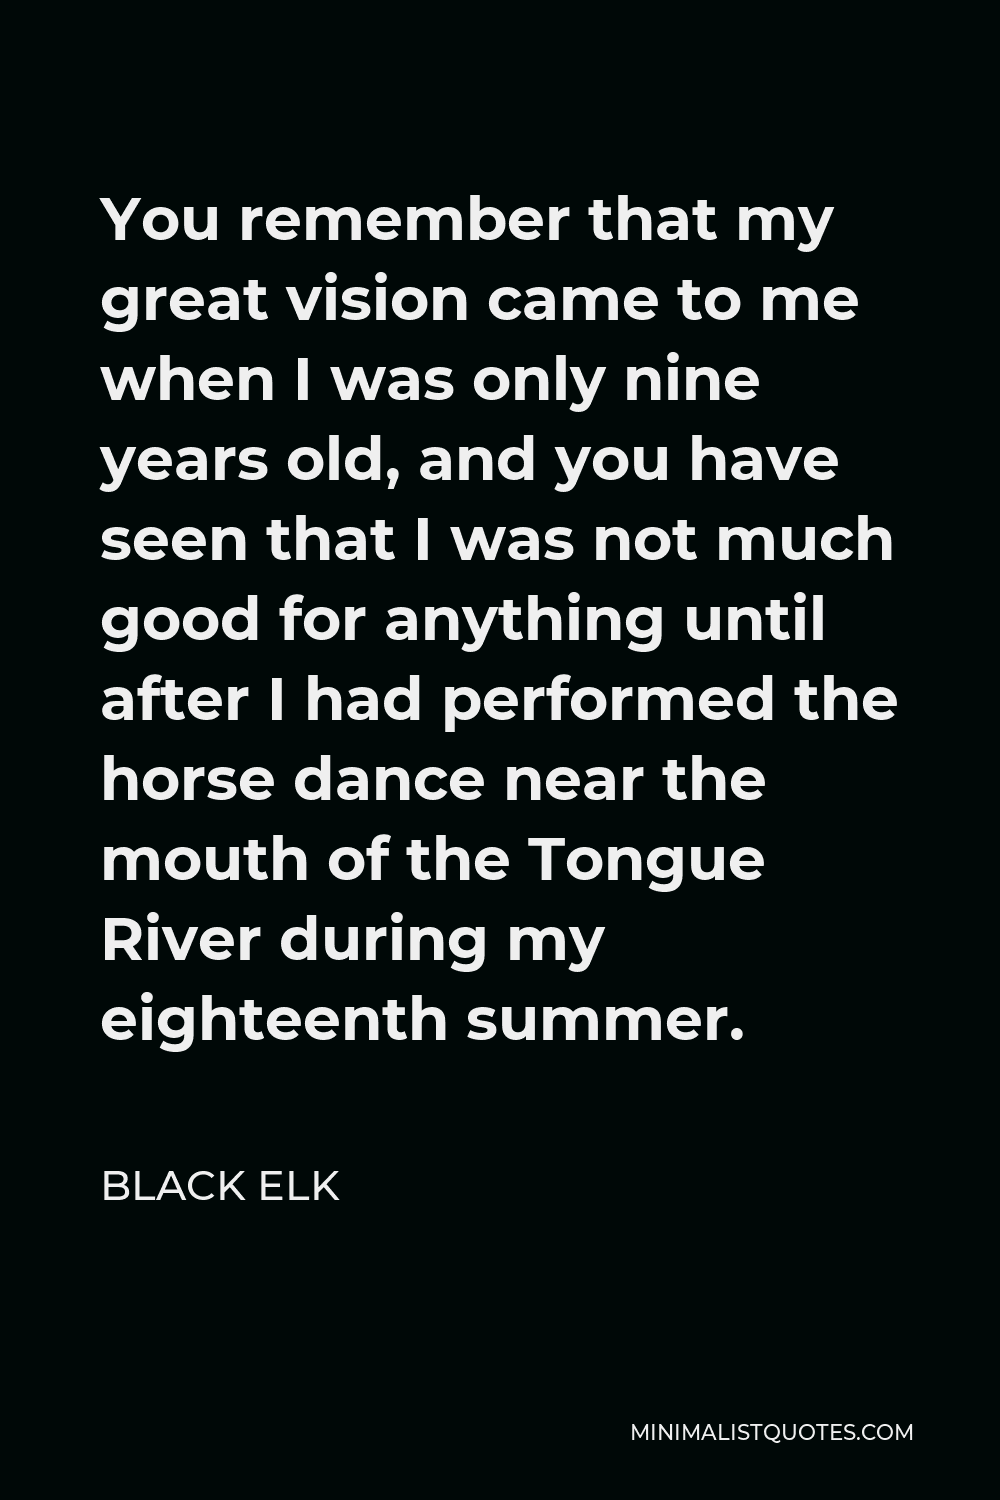 Black Elk Quote - You remember that my great vision came to me when I was only nine years old, and you have seen that I was not much good for anything until after I had performed the horse dance near the mouth of the Tongue River during my eighteenth summer.